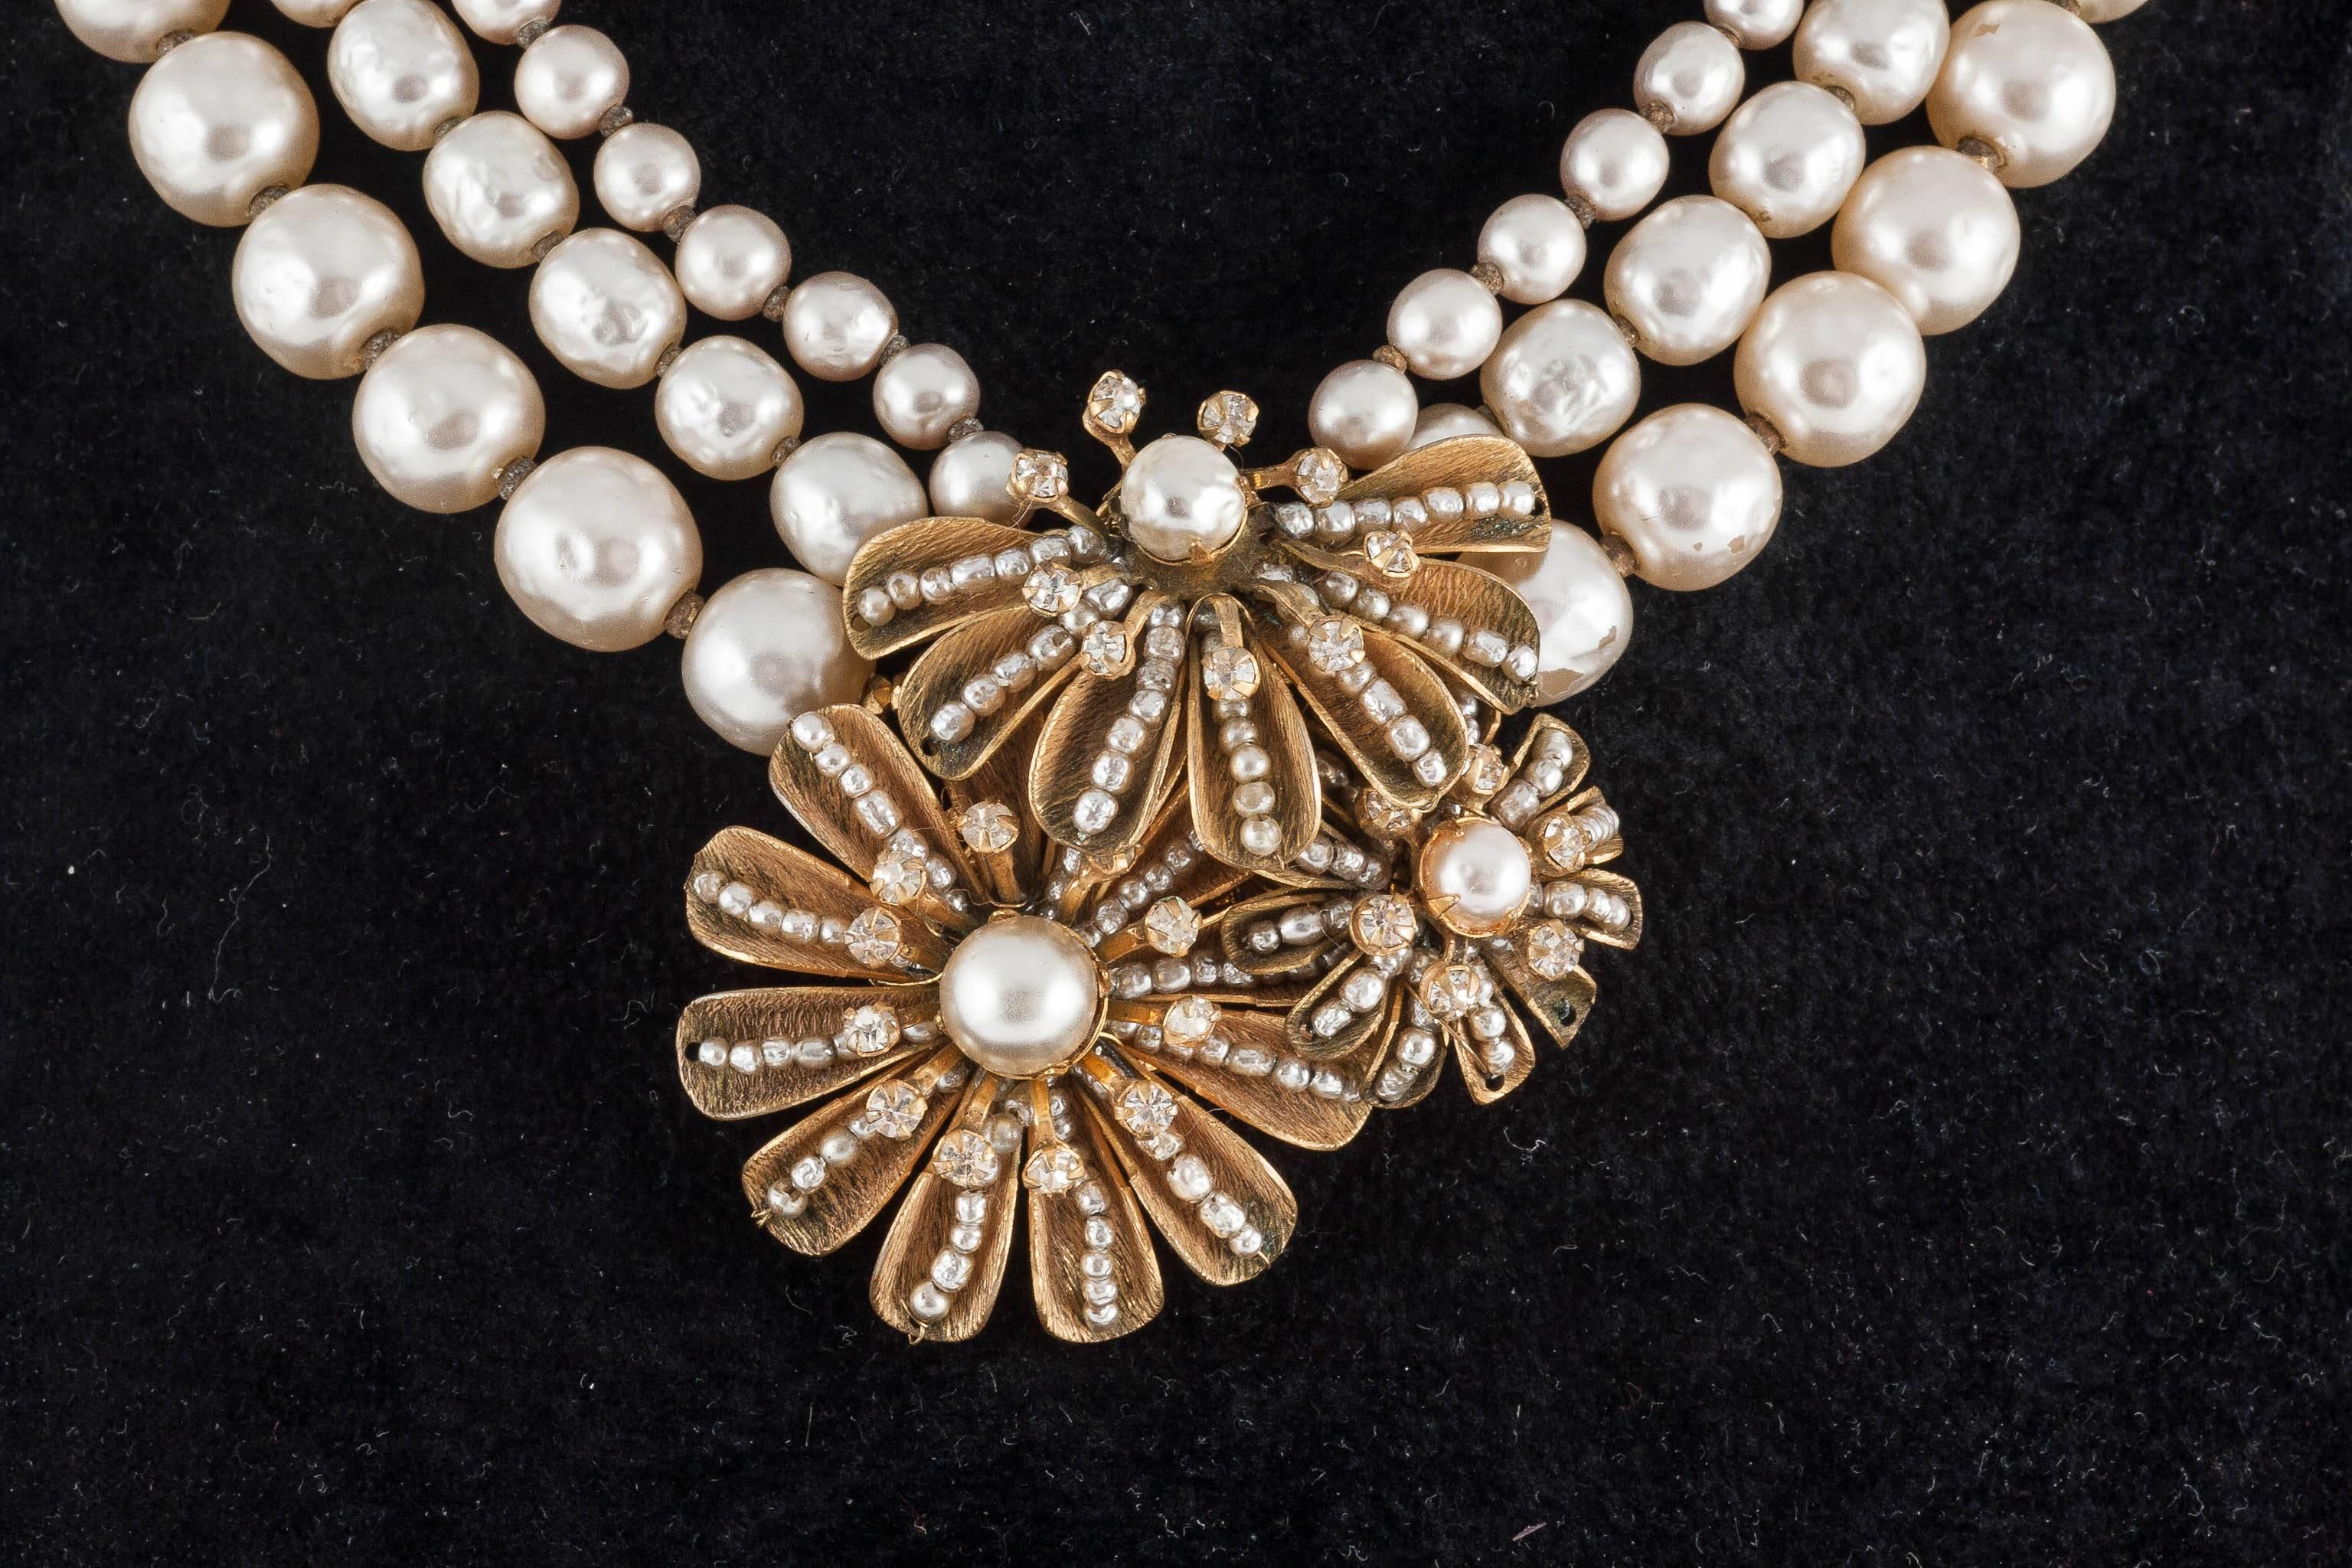 Splendid Miriam Haskell baroque pearl three row necklace, with an opulent gilt, seed pearl and paste centrepiece. Beautiful work is displayed as always in the centrepiece, with a variable baroque pearl 'chain' at the rear to allow for variation in